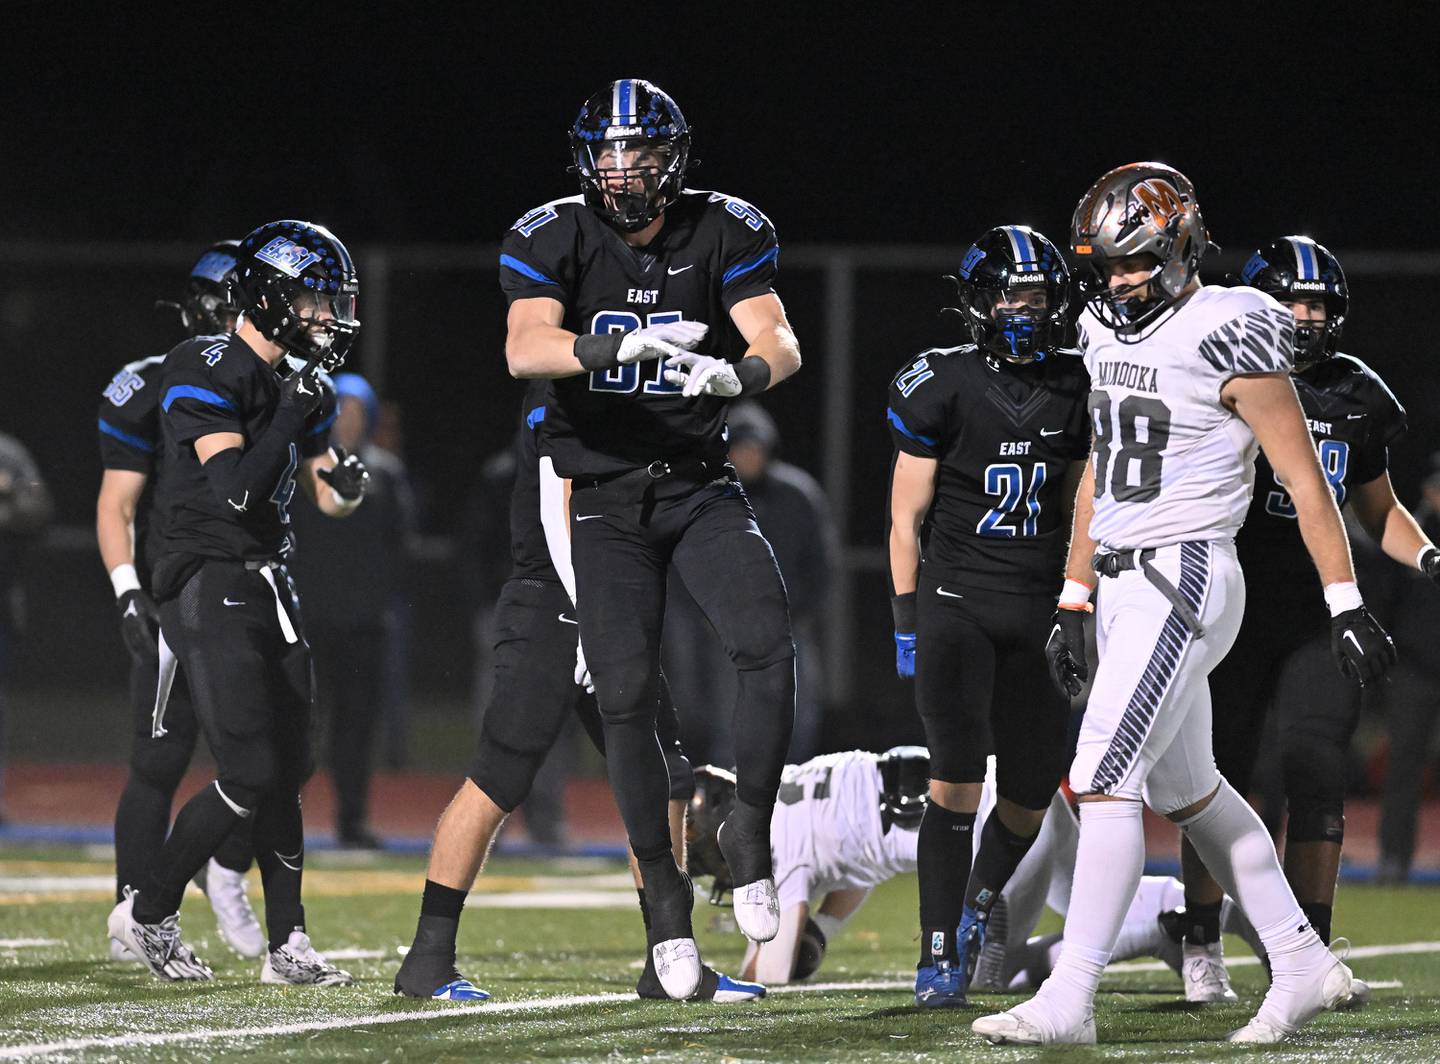 Lincoln-Way East's defensive end Caden O'Rourke celebrates after making a tackle for a loss during the class 8A second round playoff game against Minooka on Friday, Nov. 03, 2023, at Franfort. (Dean Reid for Shaw Local News Network)